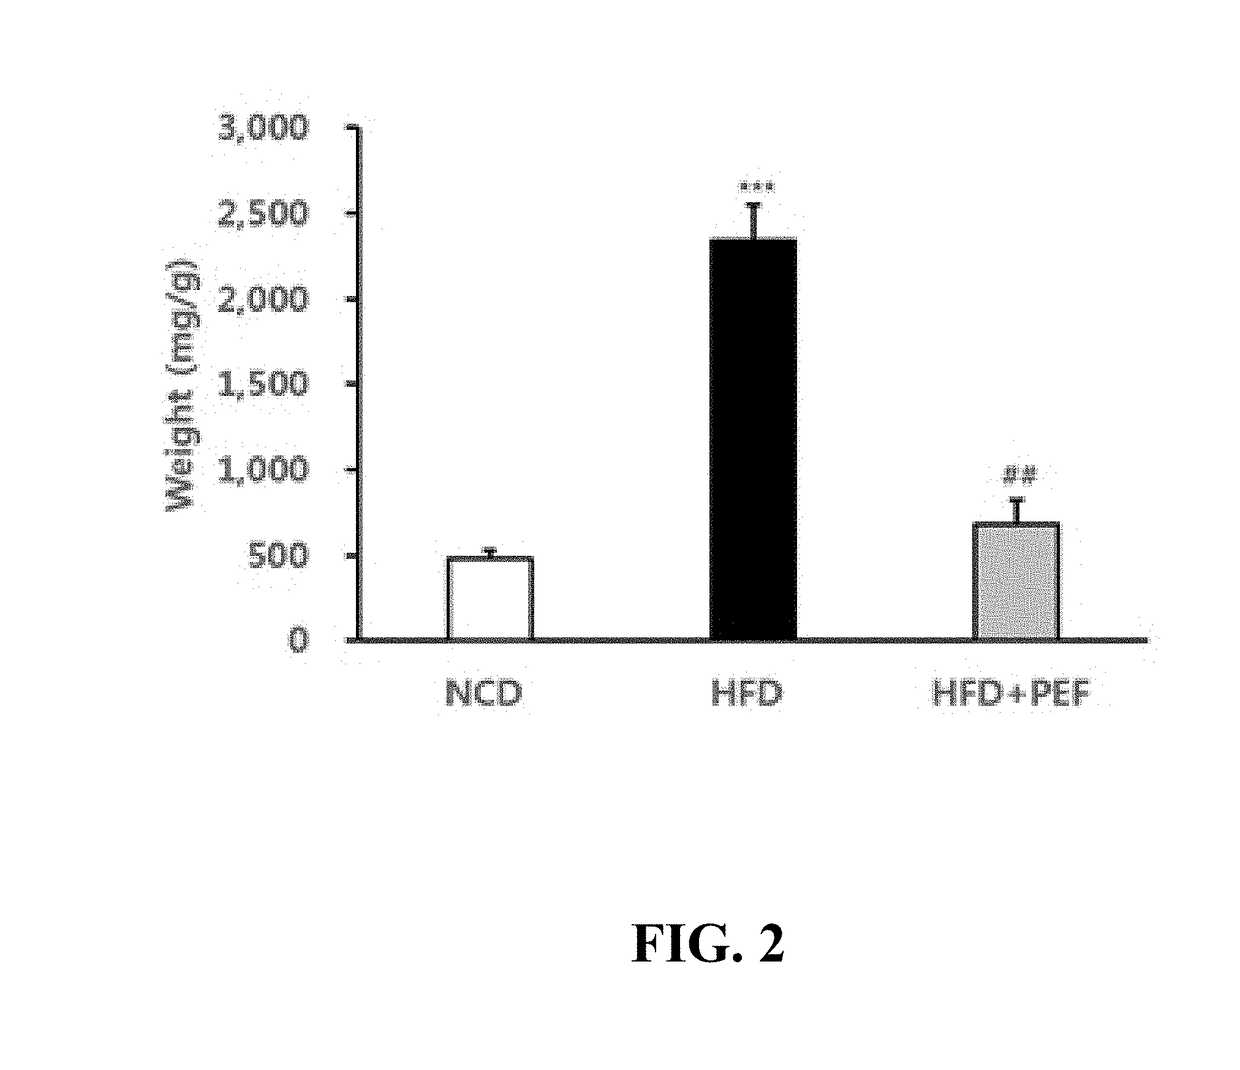 Pharmaceutical composition or functional health food for preventing and treating metabolic diseases, containing water extract of pleurotus eryngii var. ferulae (pf.) as active ingredient